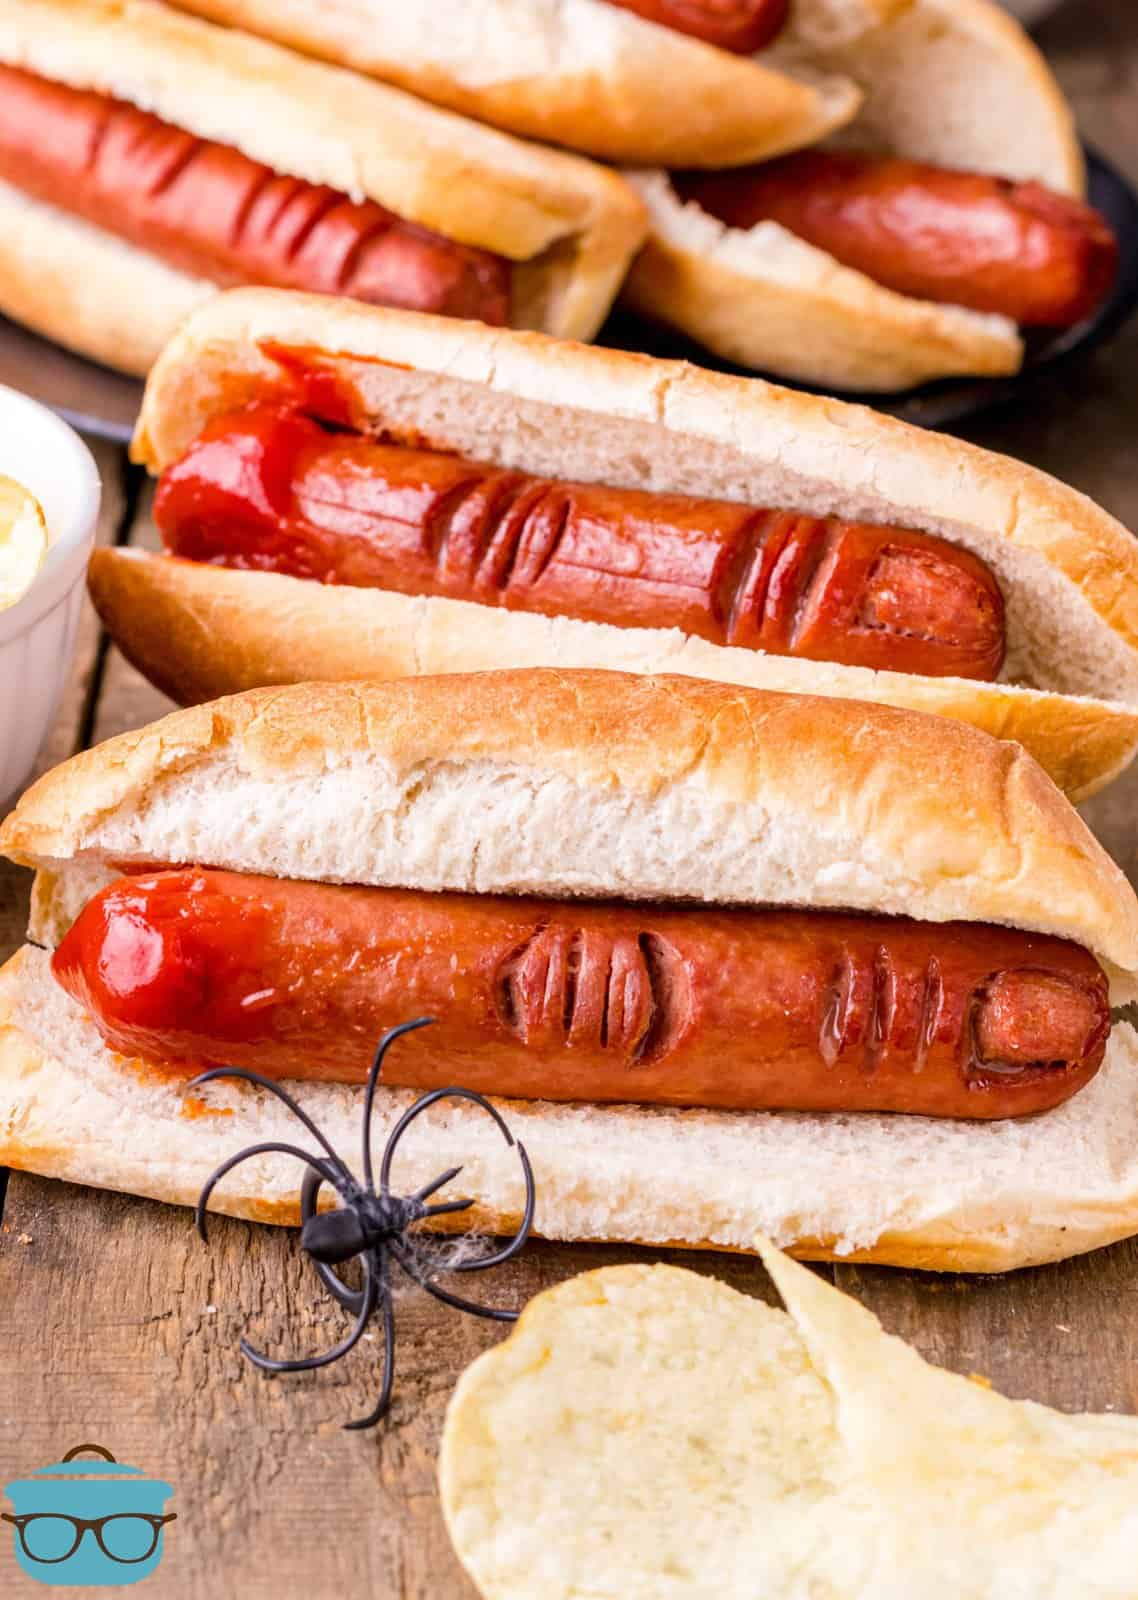 Halloween Hot Dog Fingers in buns with chips and a fake spider.